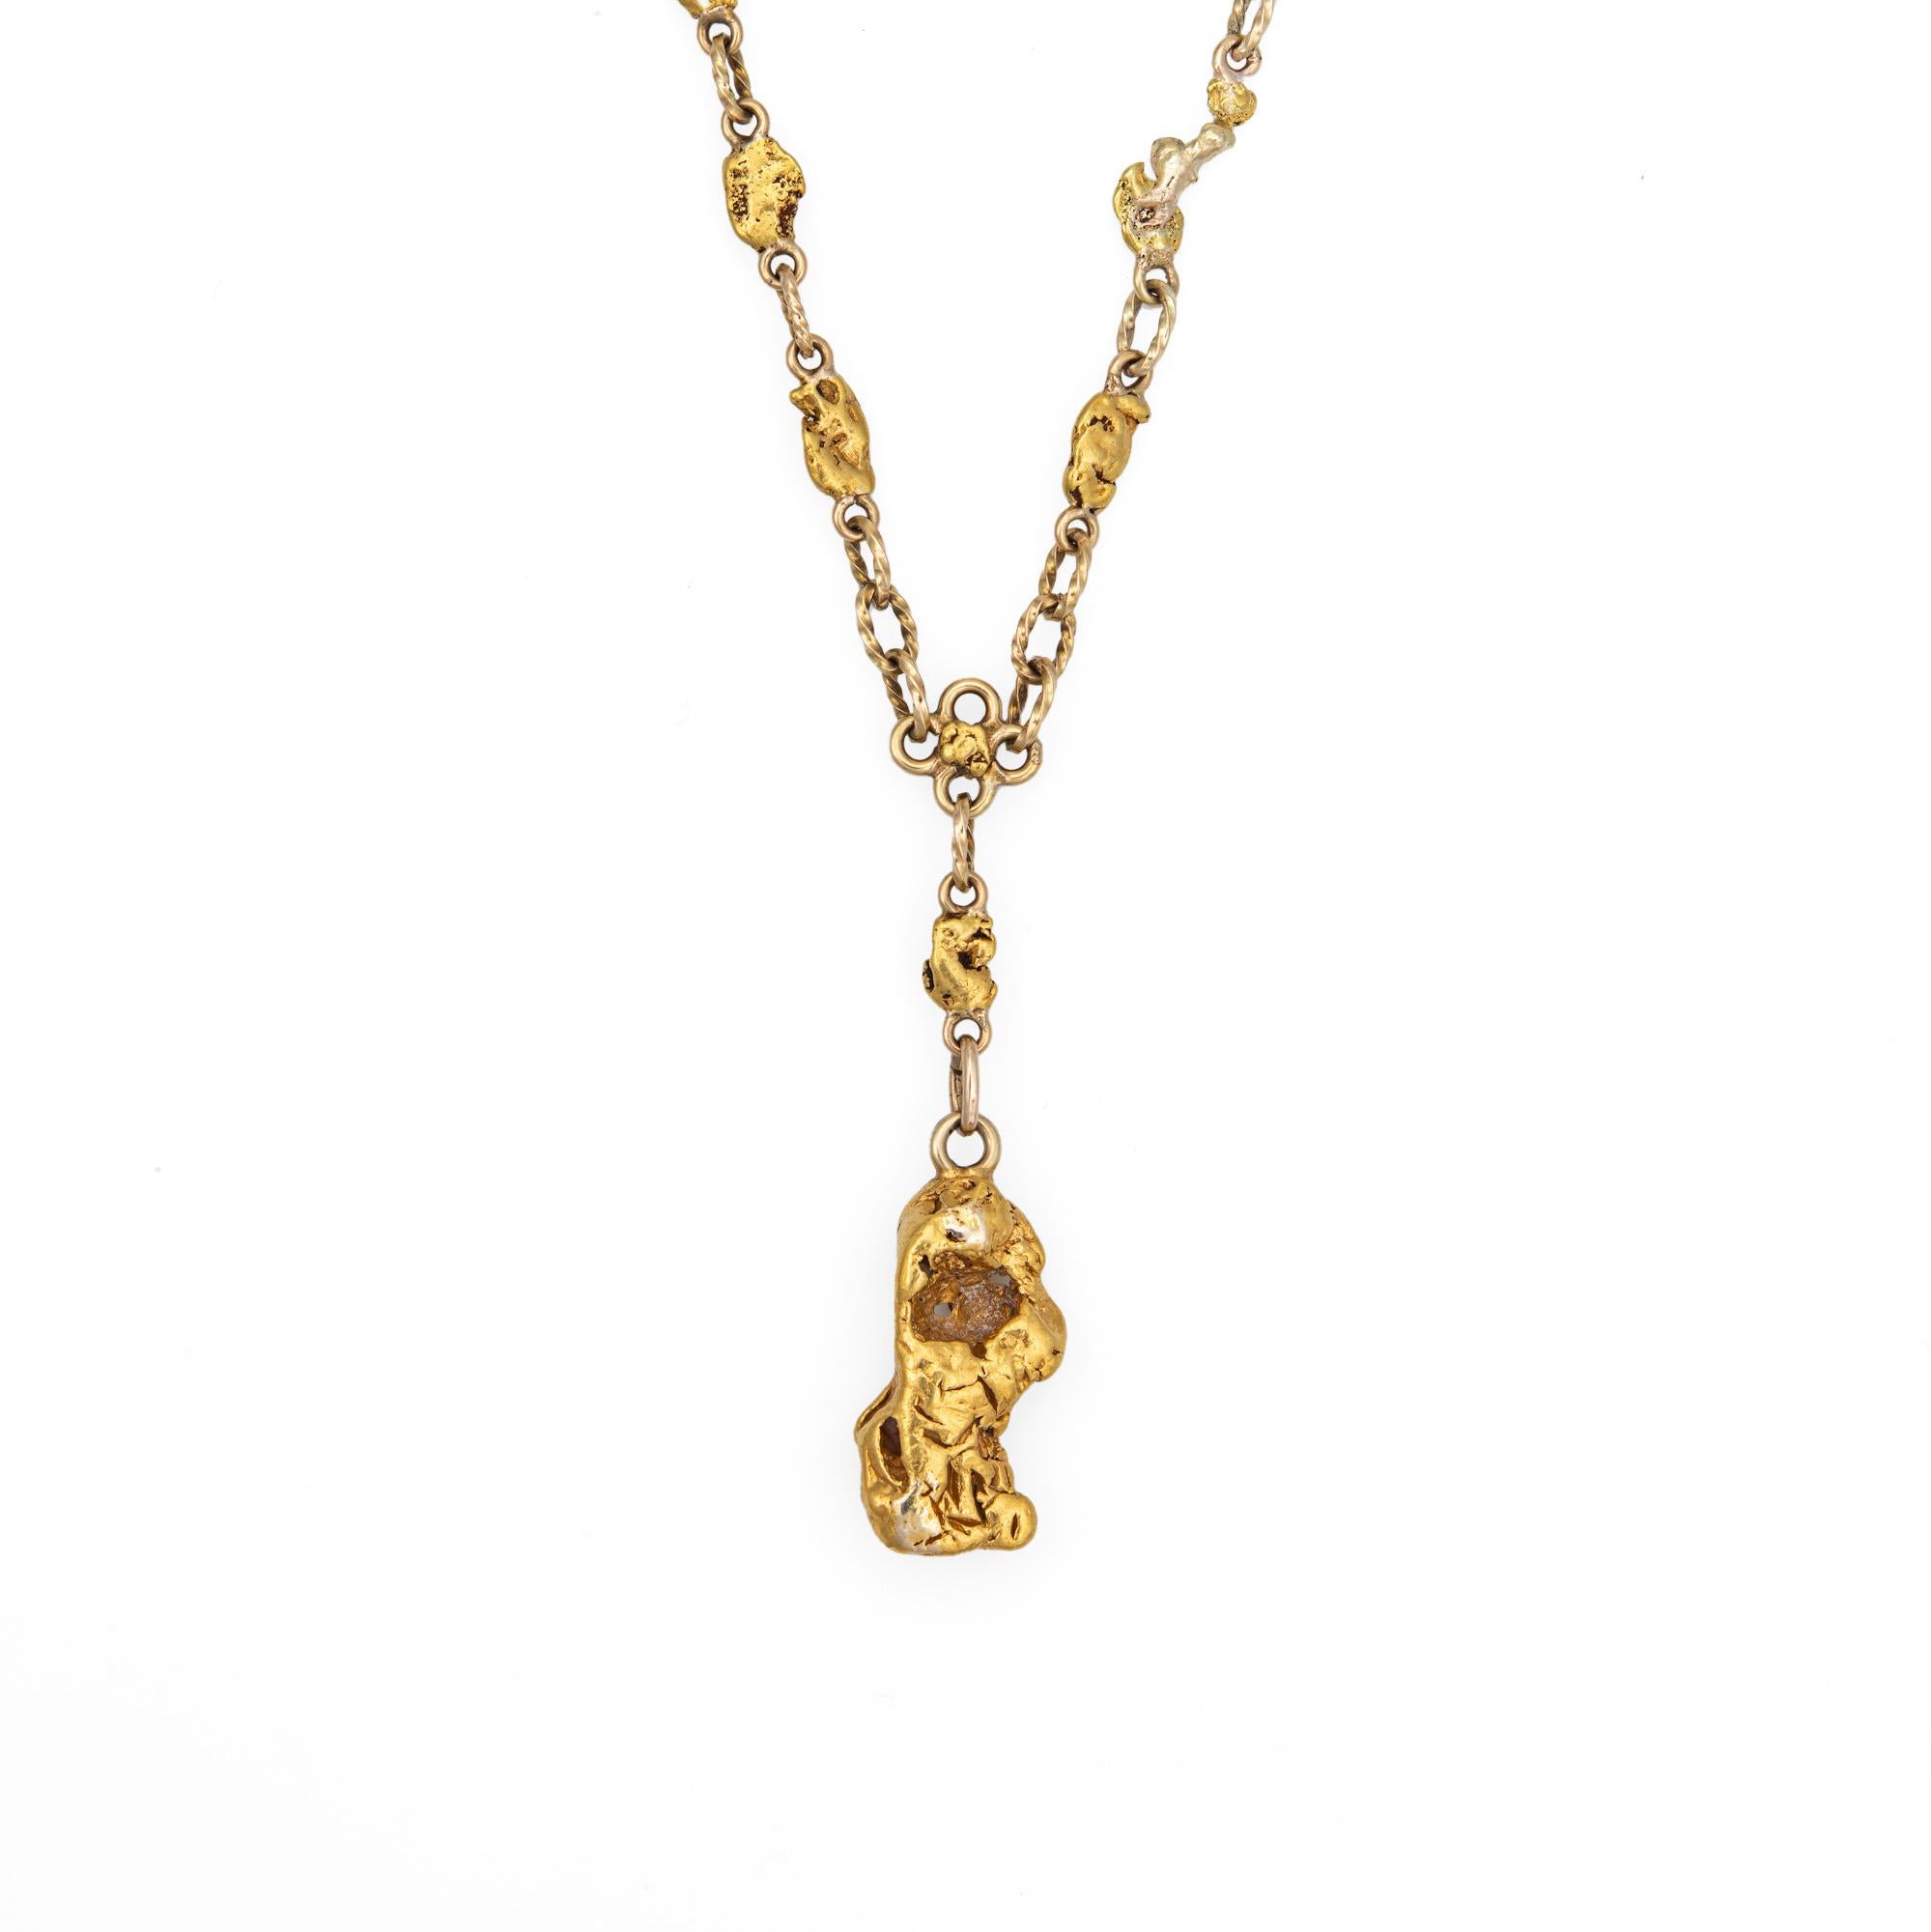 Finely detailed antique Victorian gold nugget necklace (circa 1880s to 1900s), crafted with a 14 karat yellow gold chain and 22k to 24k natural gold nuggets. 

The bold and distinct Victorian era necklace highlights a beautiful display of 26 natural